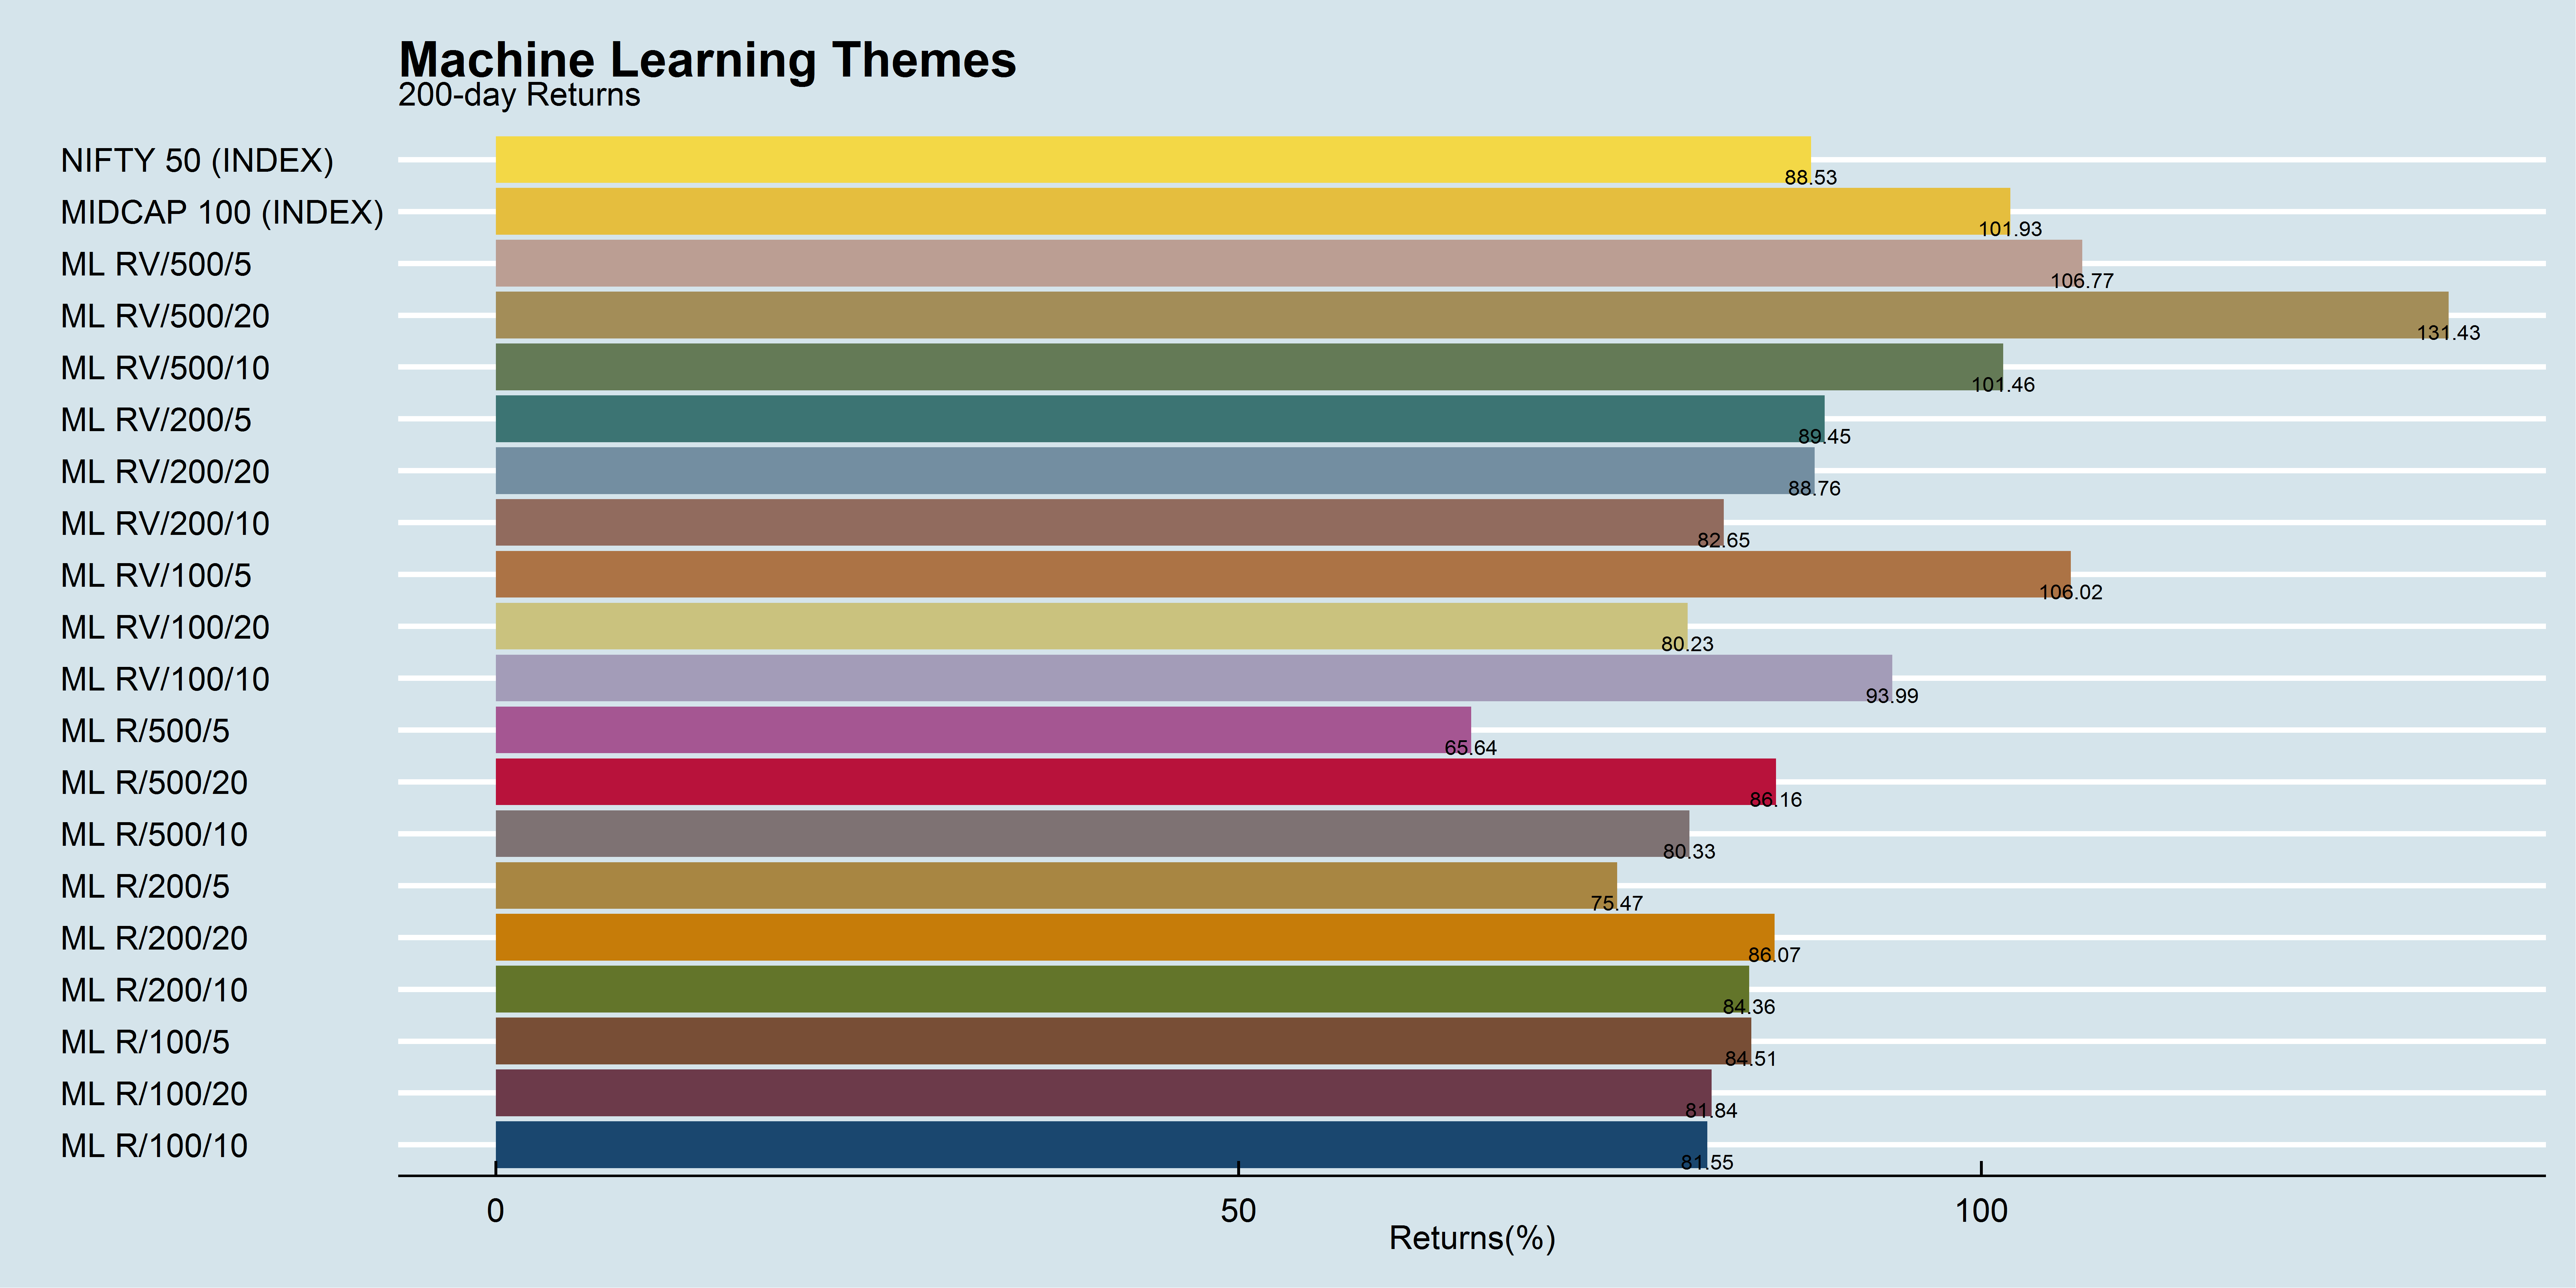 Machine Learning Themes 200-day performance